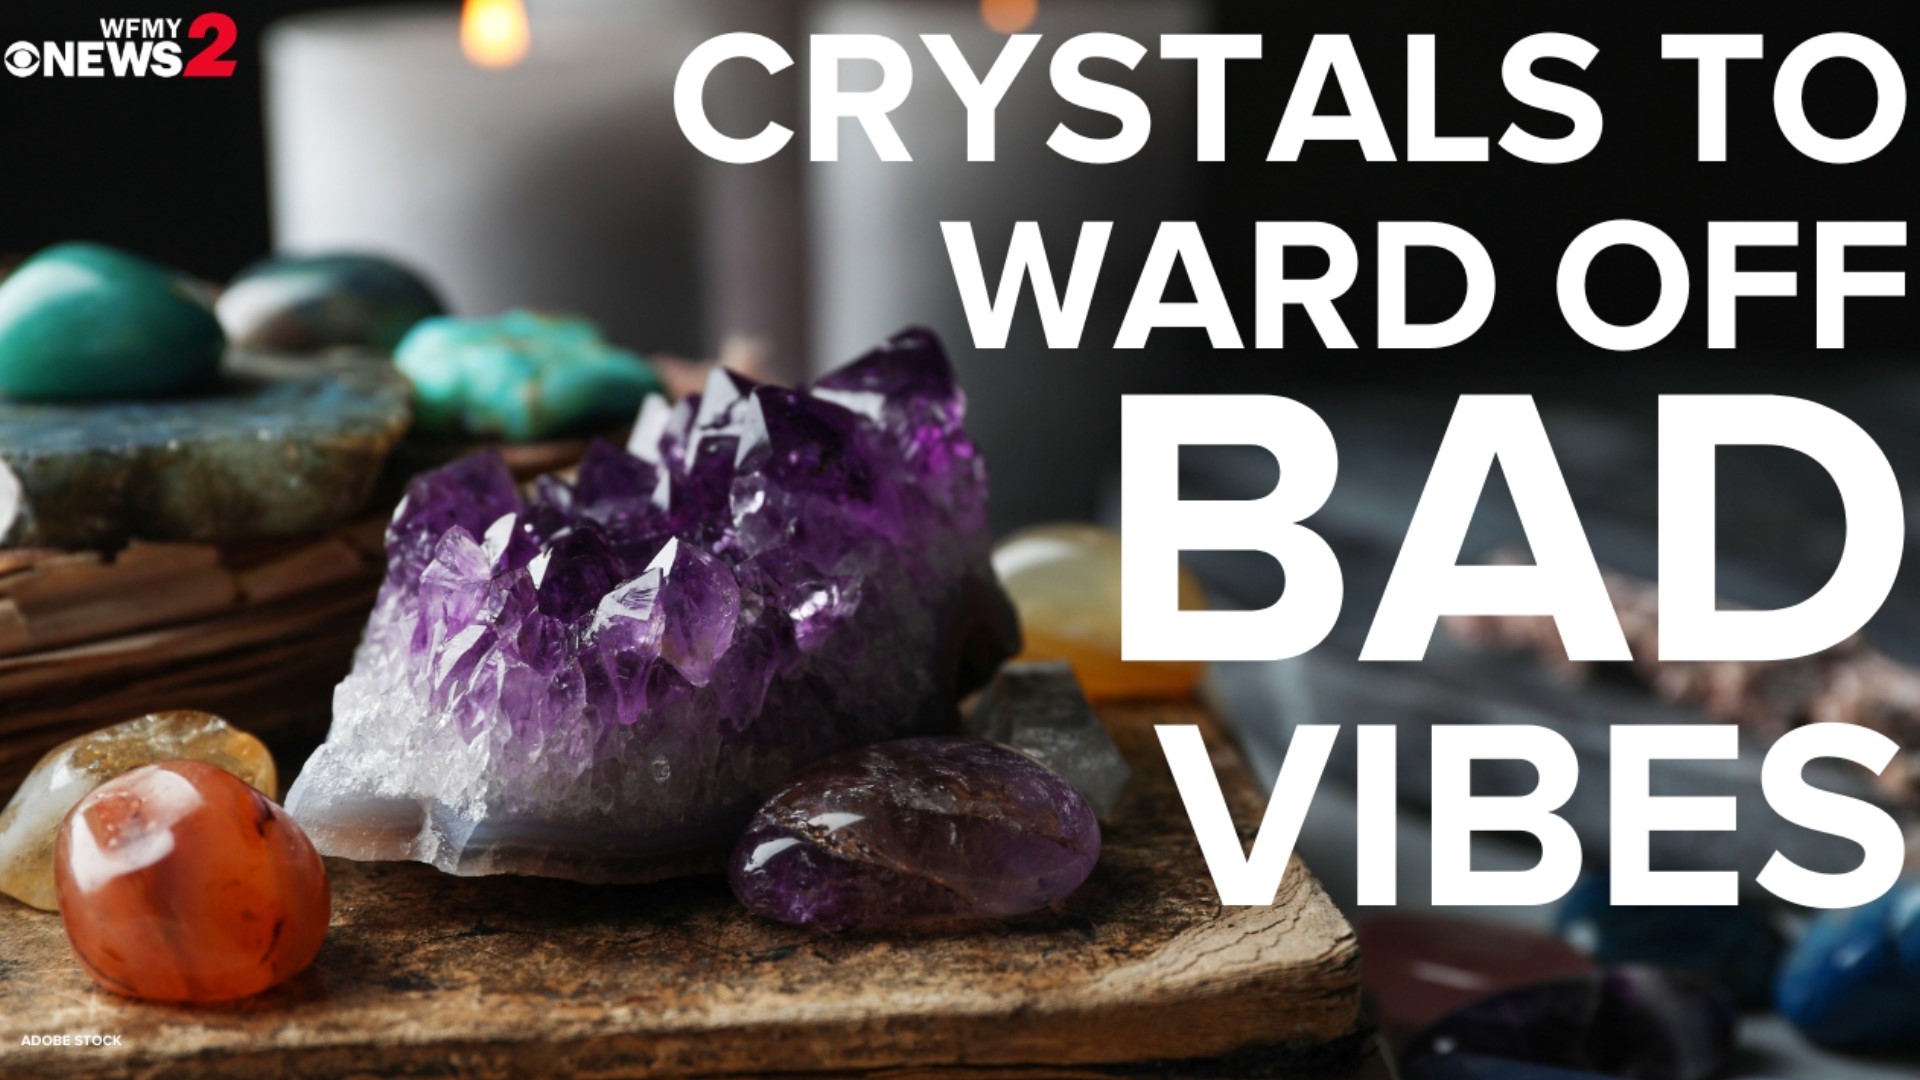 Ben Briscoe give his 2 Cents on how crystal energy helps him ward off negative energy.